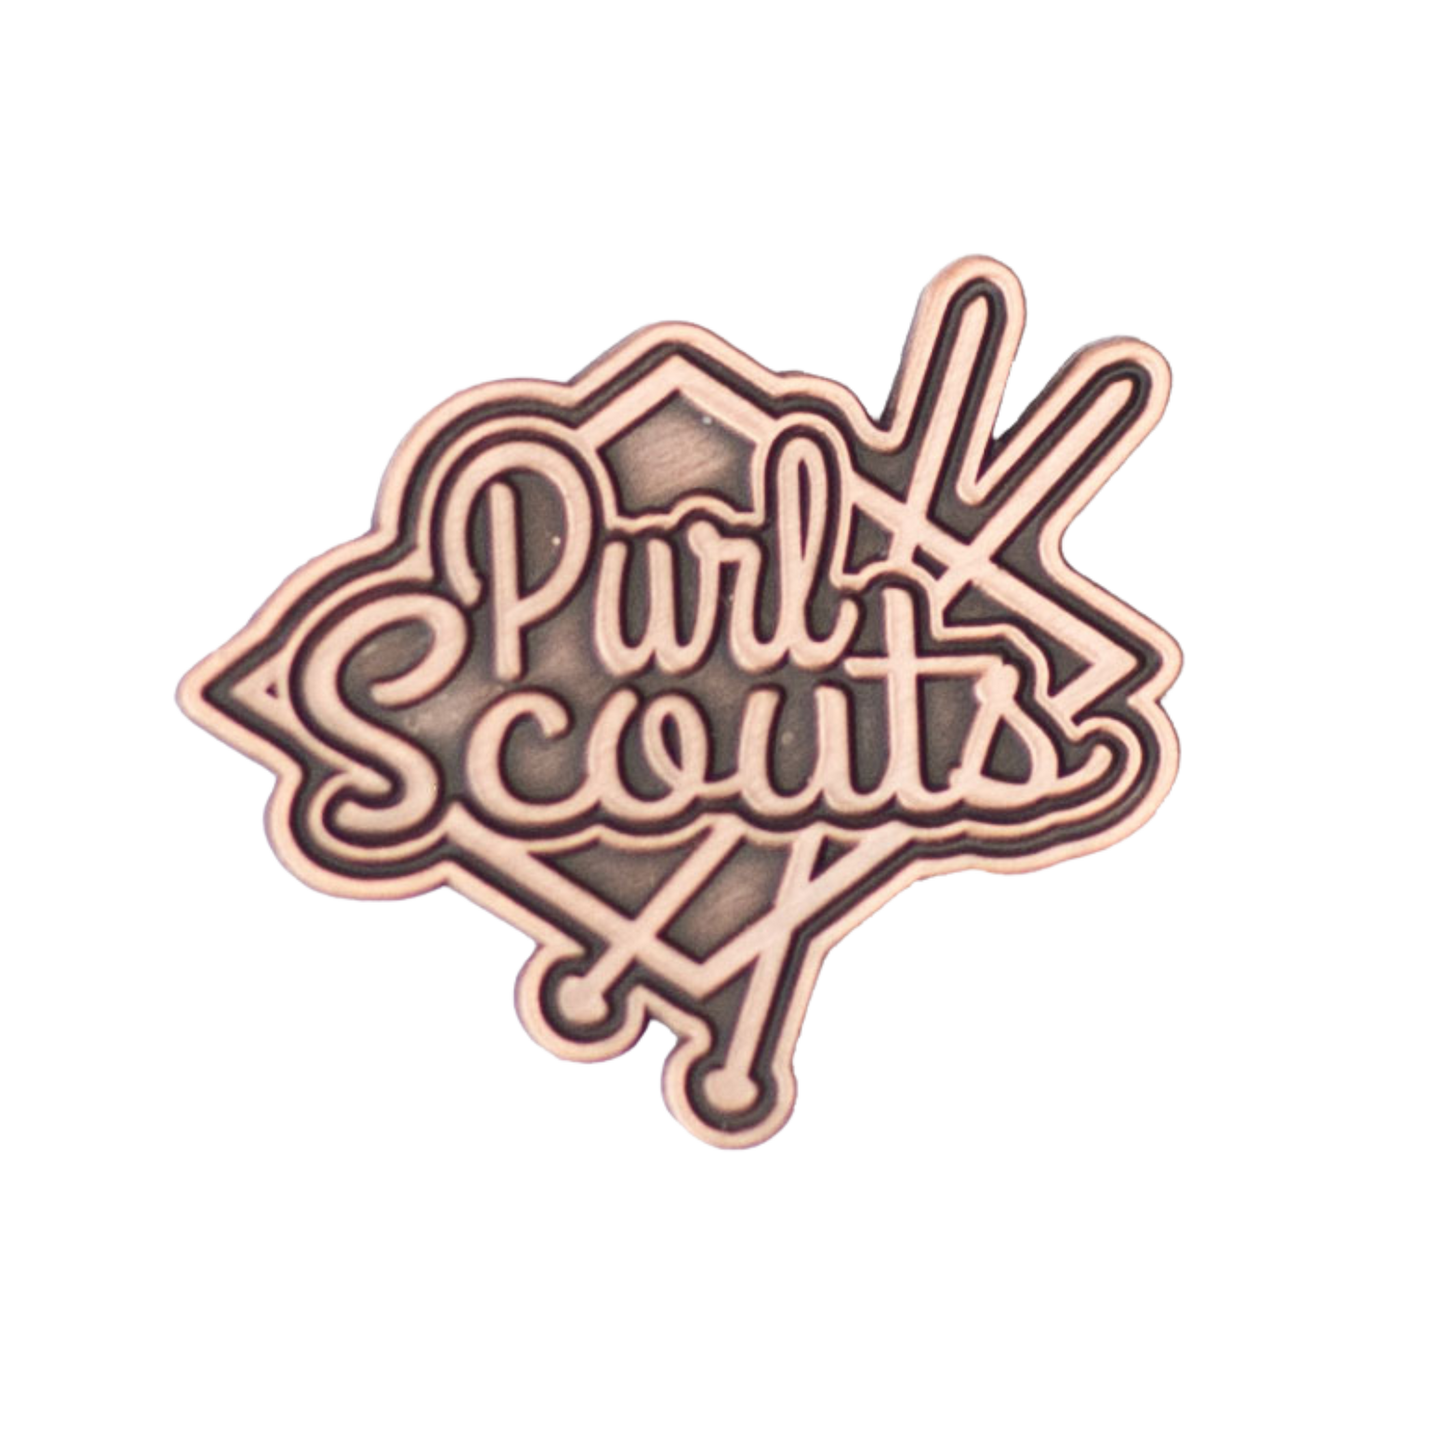 Purl Scouts Die Struck Pin